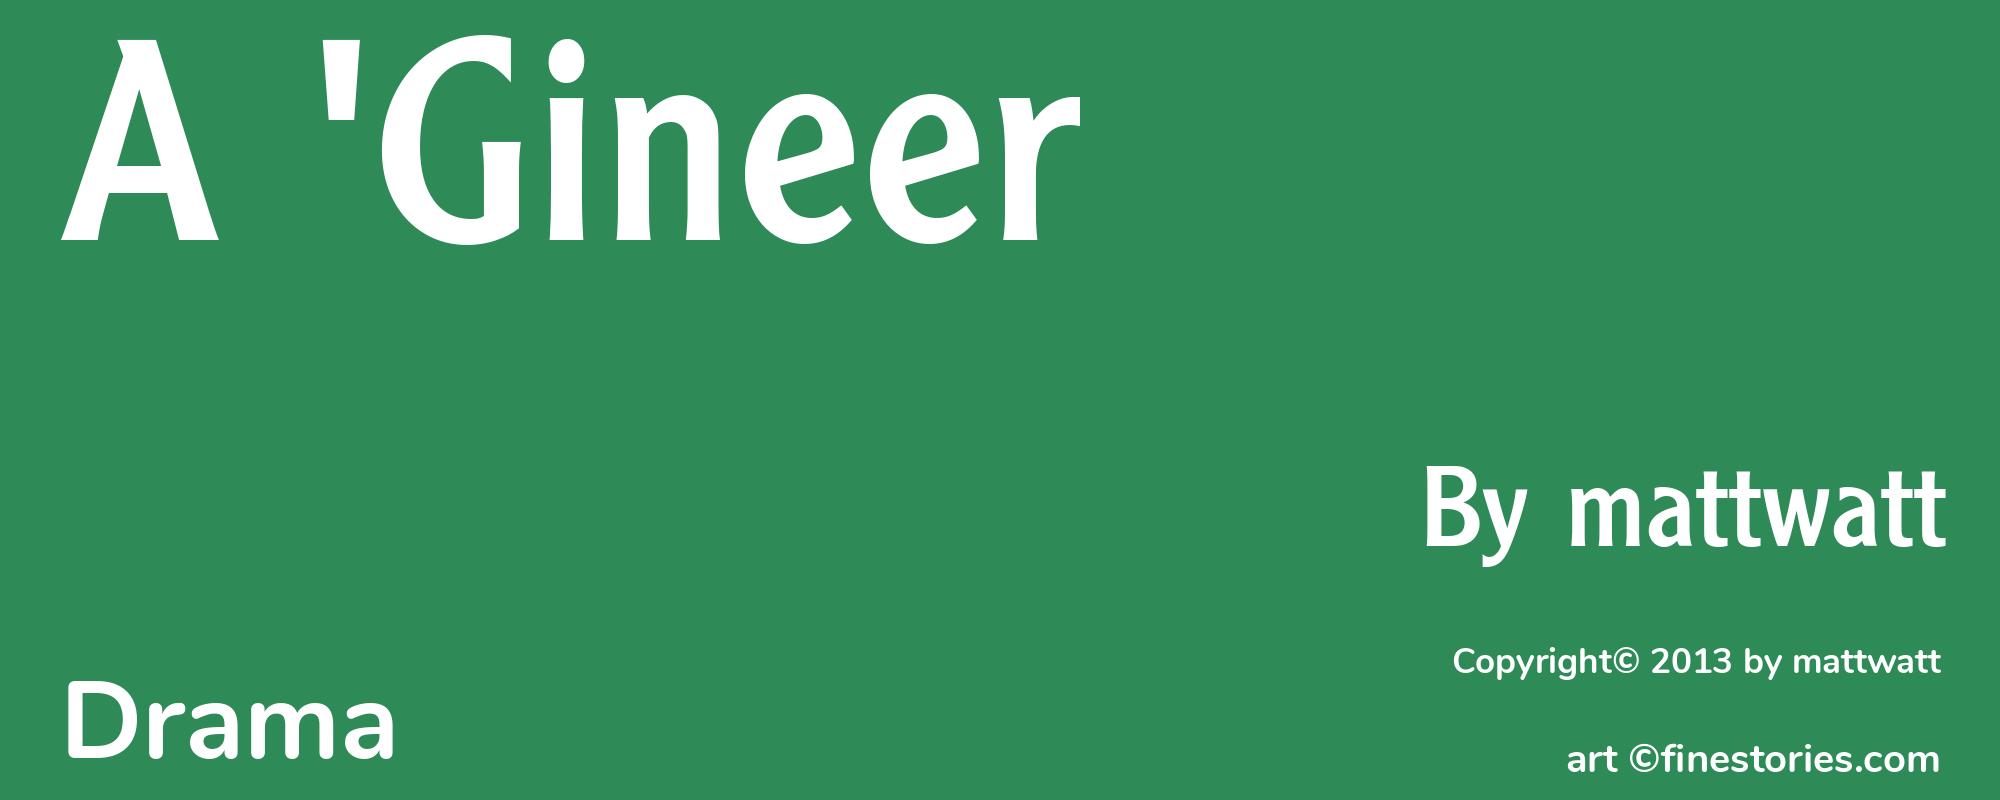 A 'Gineer - Cover